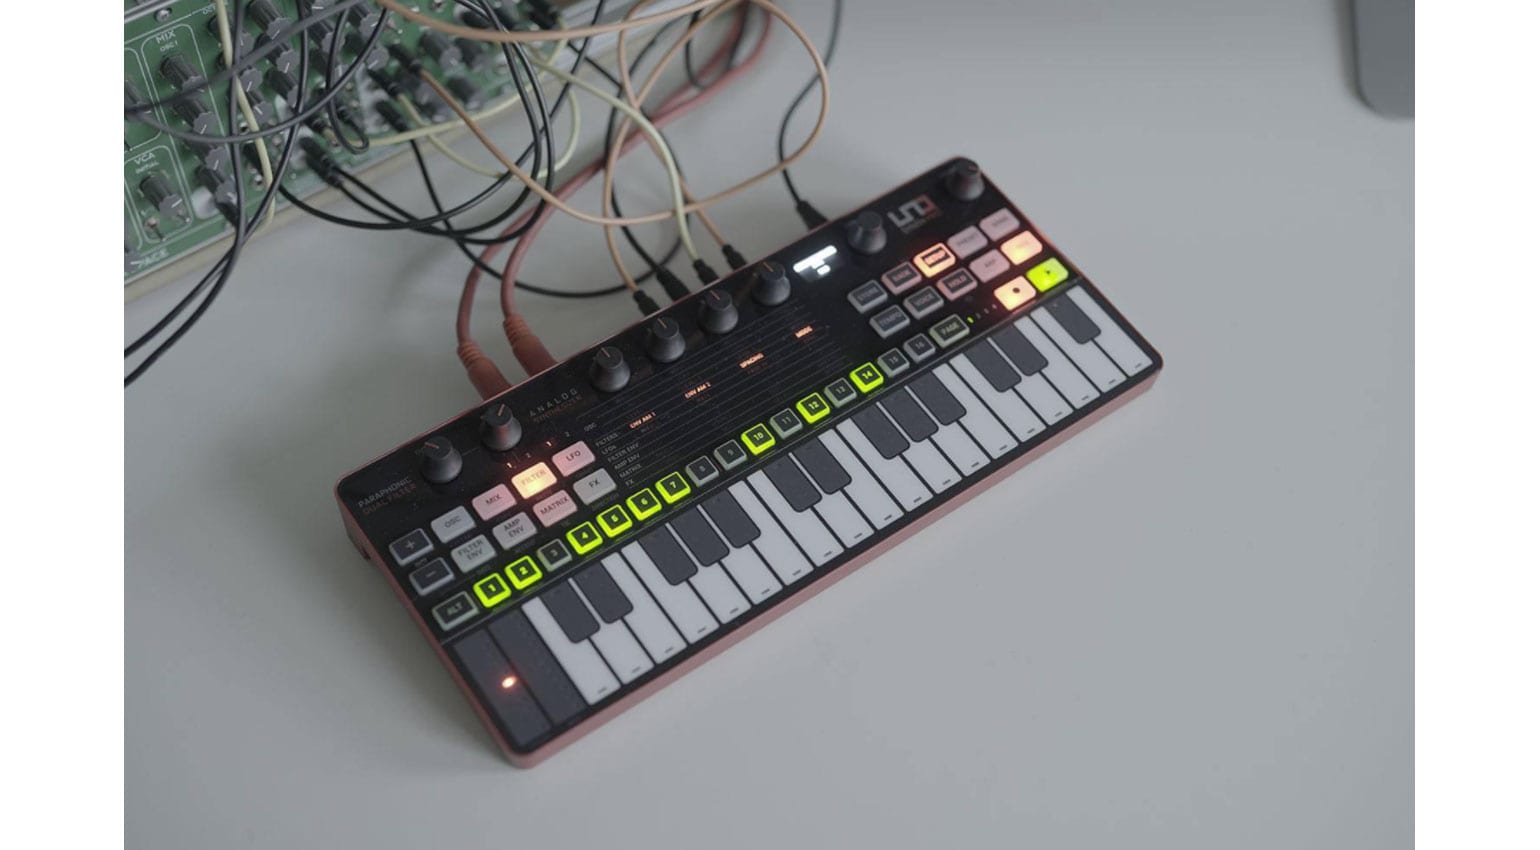 Leak! IK Multimedia poised to release Uno Synth Pro paraphonic 